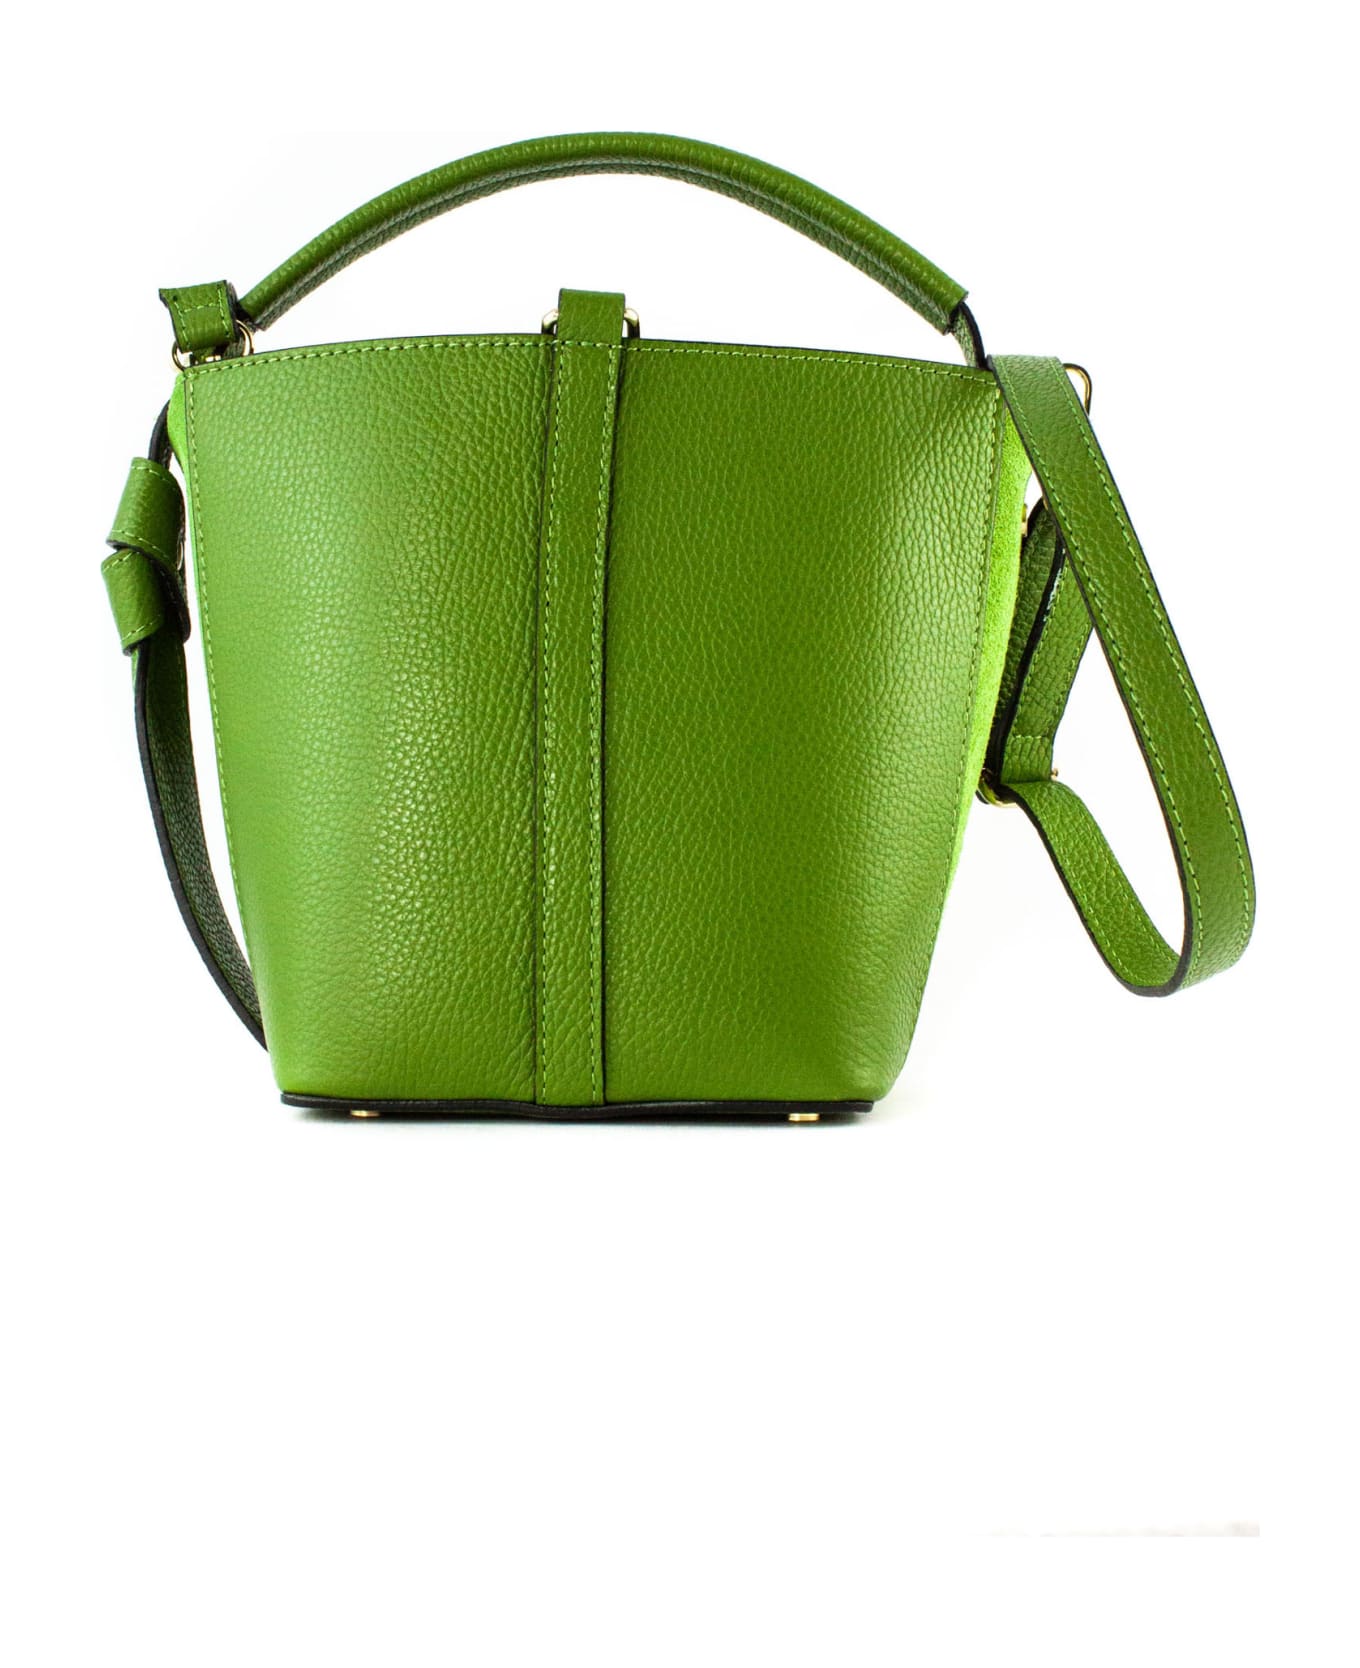 Avenue 67 Green Grained Leather Bag - Green